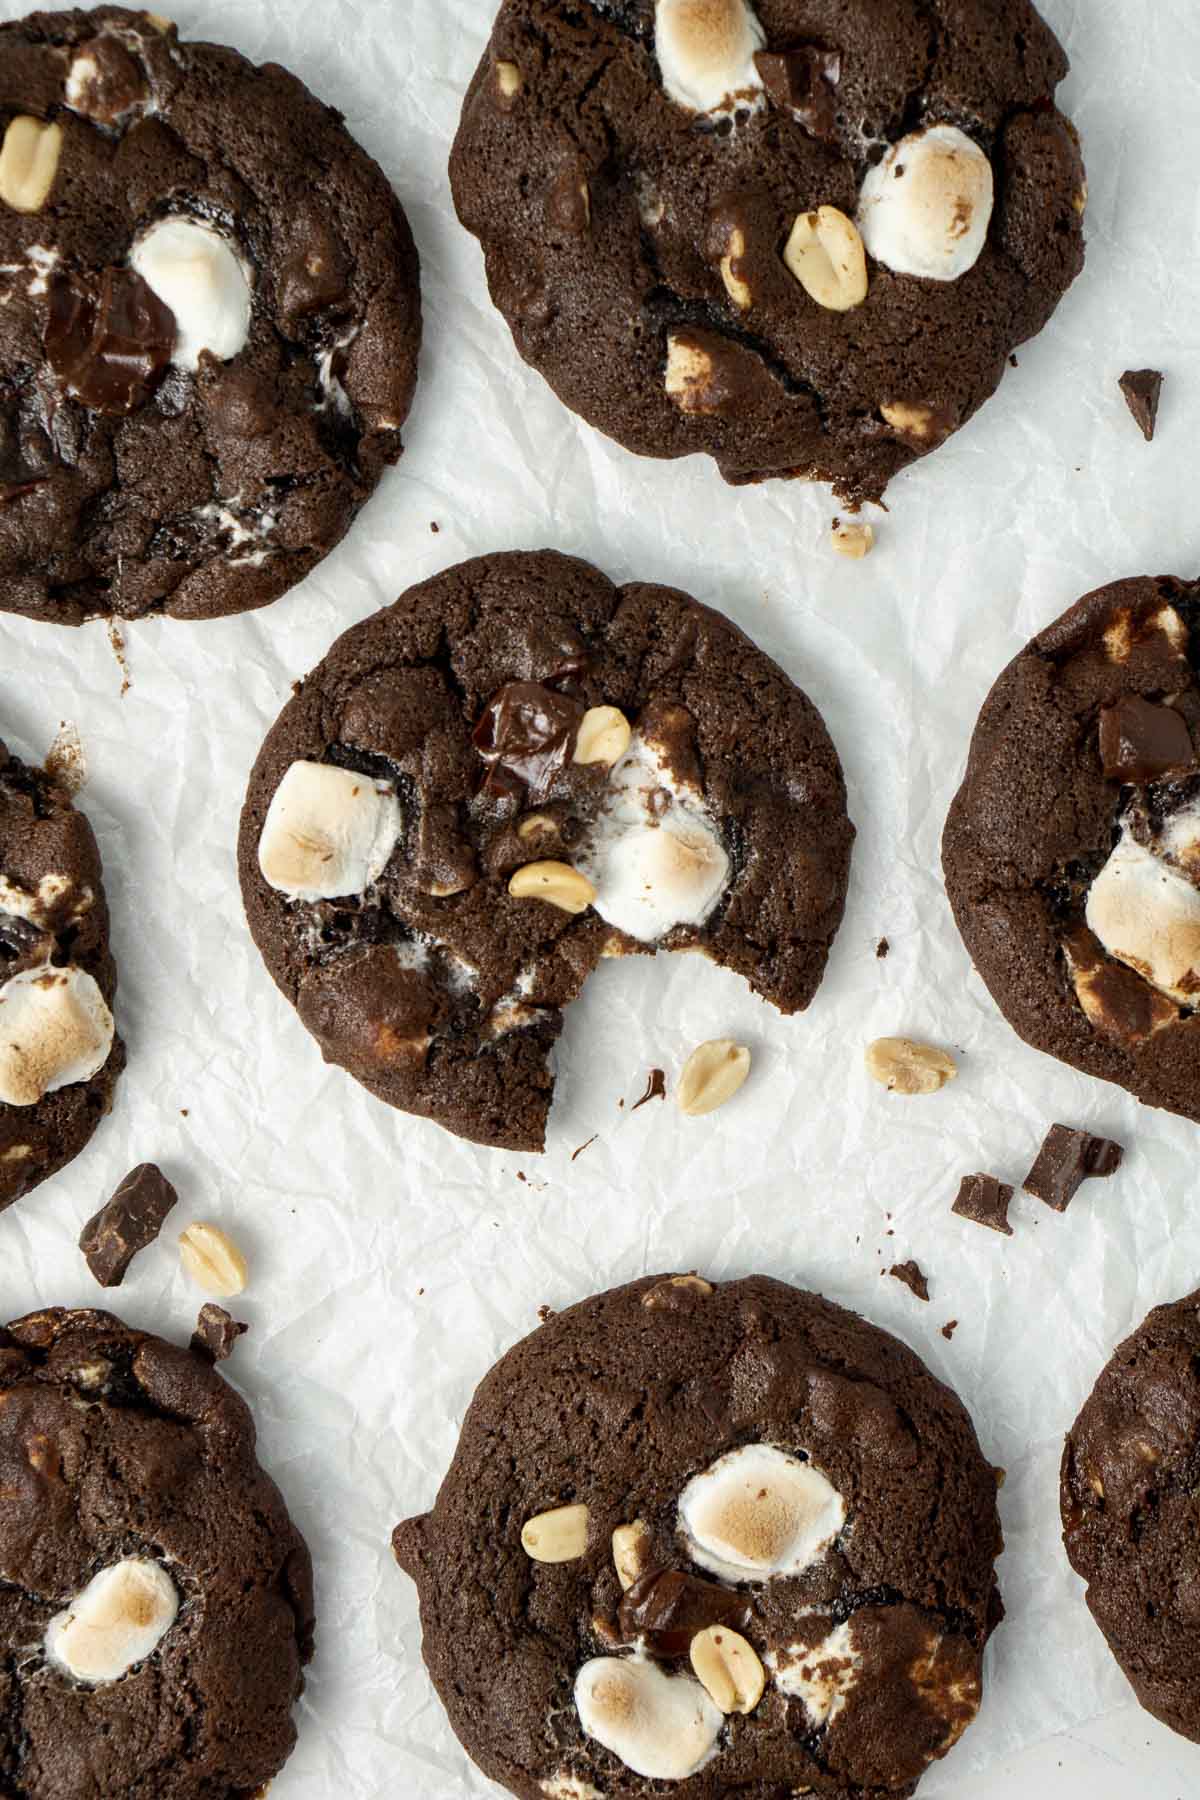 Rocky road cookies on baking paper, one with a bite taken.